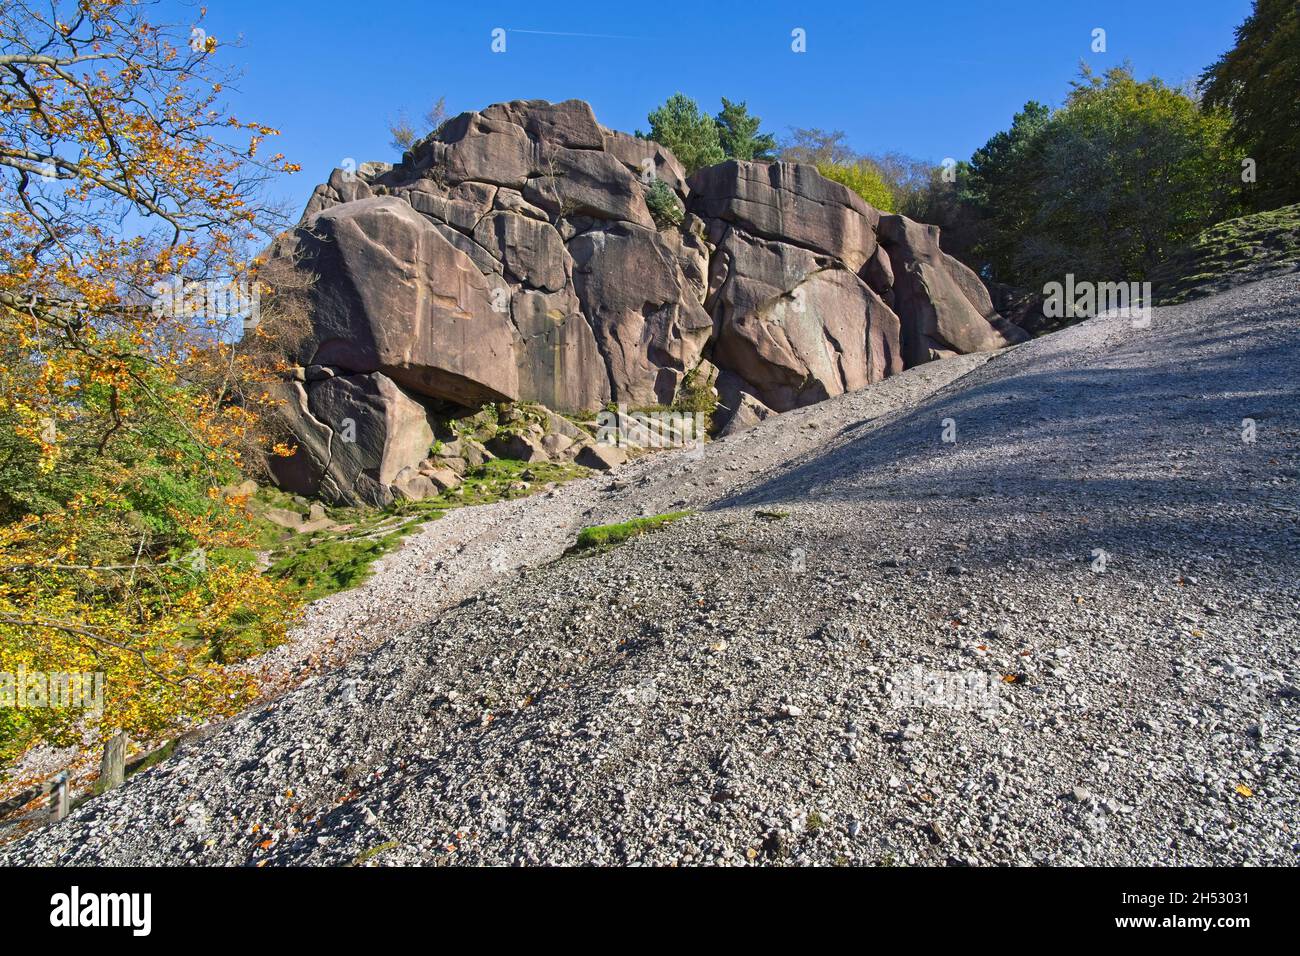 The Black Rocks gritstone outcrop on a steep slope near Wirksworth, Derbyshire on a bright autumn morning. Stock Photo